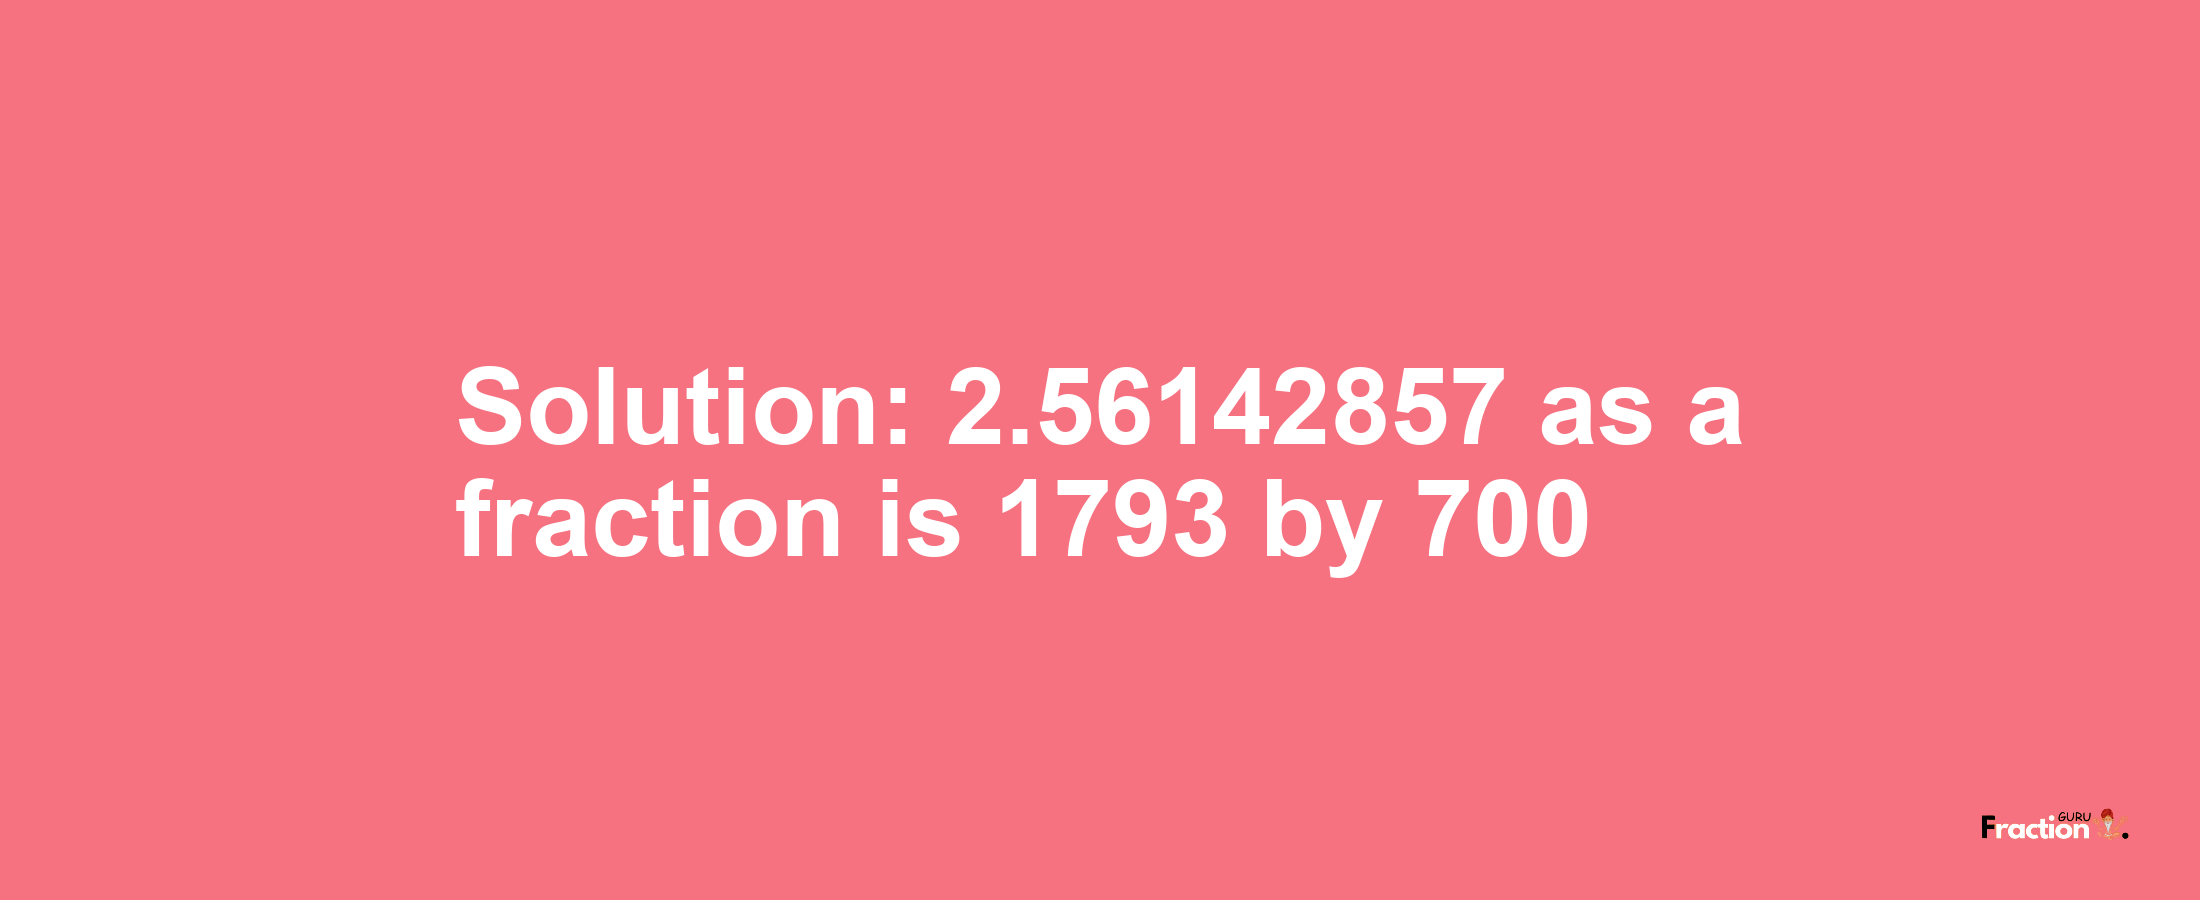 Solution:2.56142857 as a fraction is 1793/700